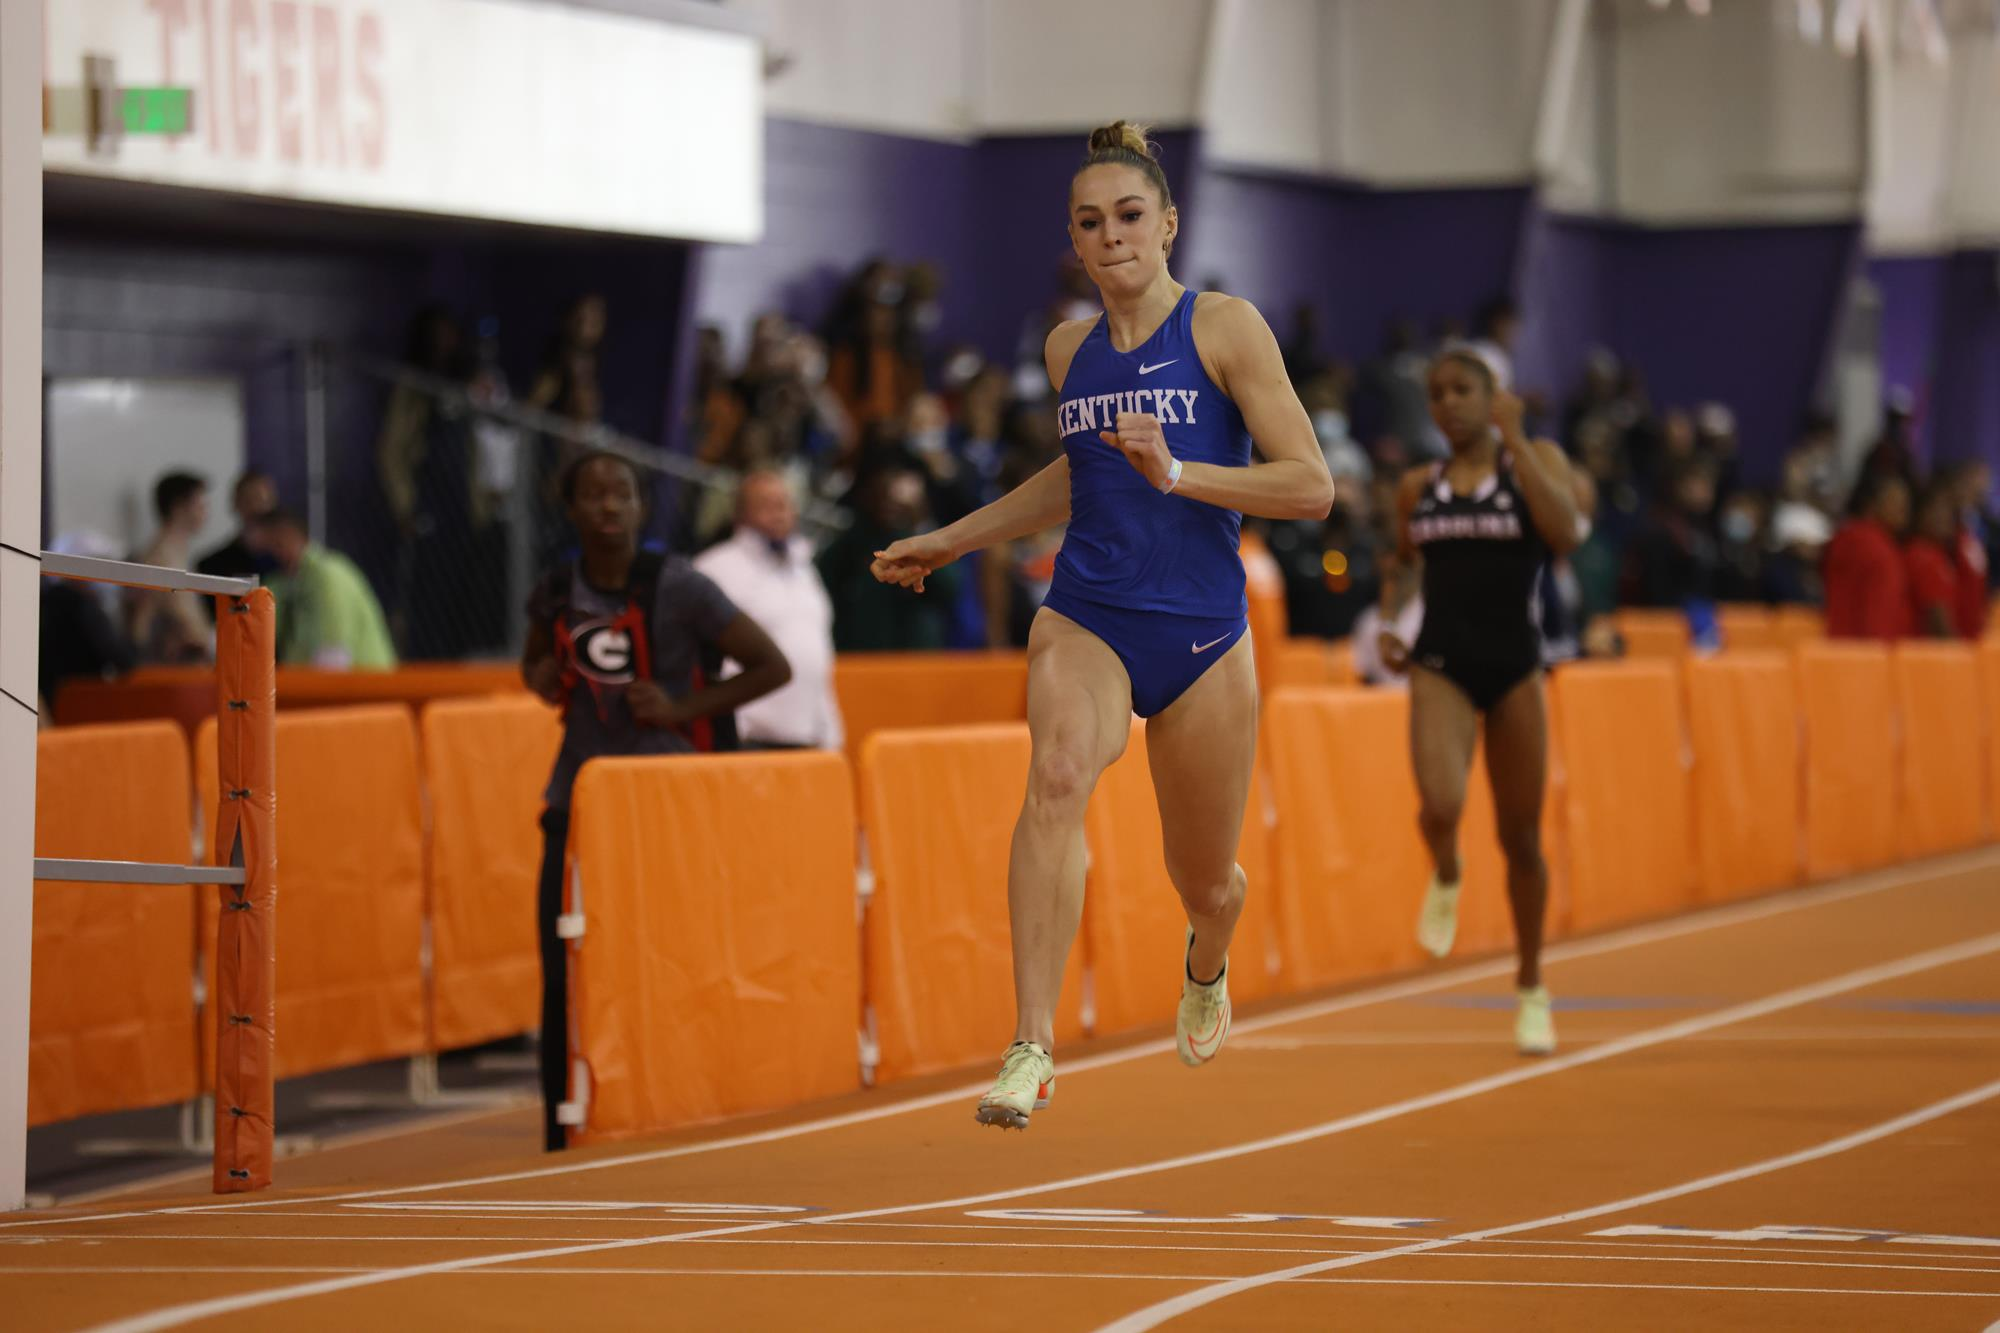 Steiner Breaks Own 200m Collegiate Record at Tiger Paw Invitational